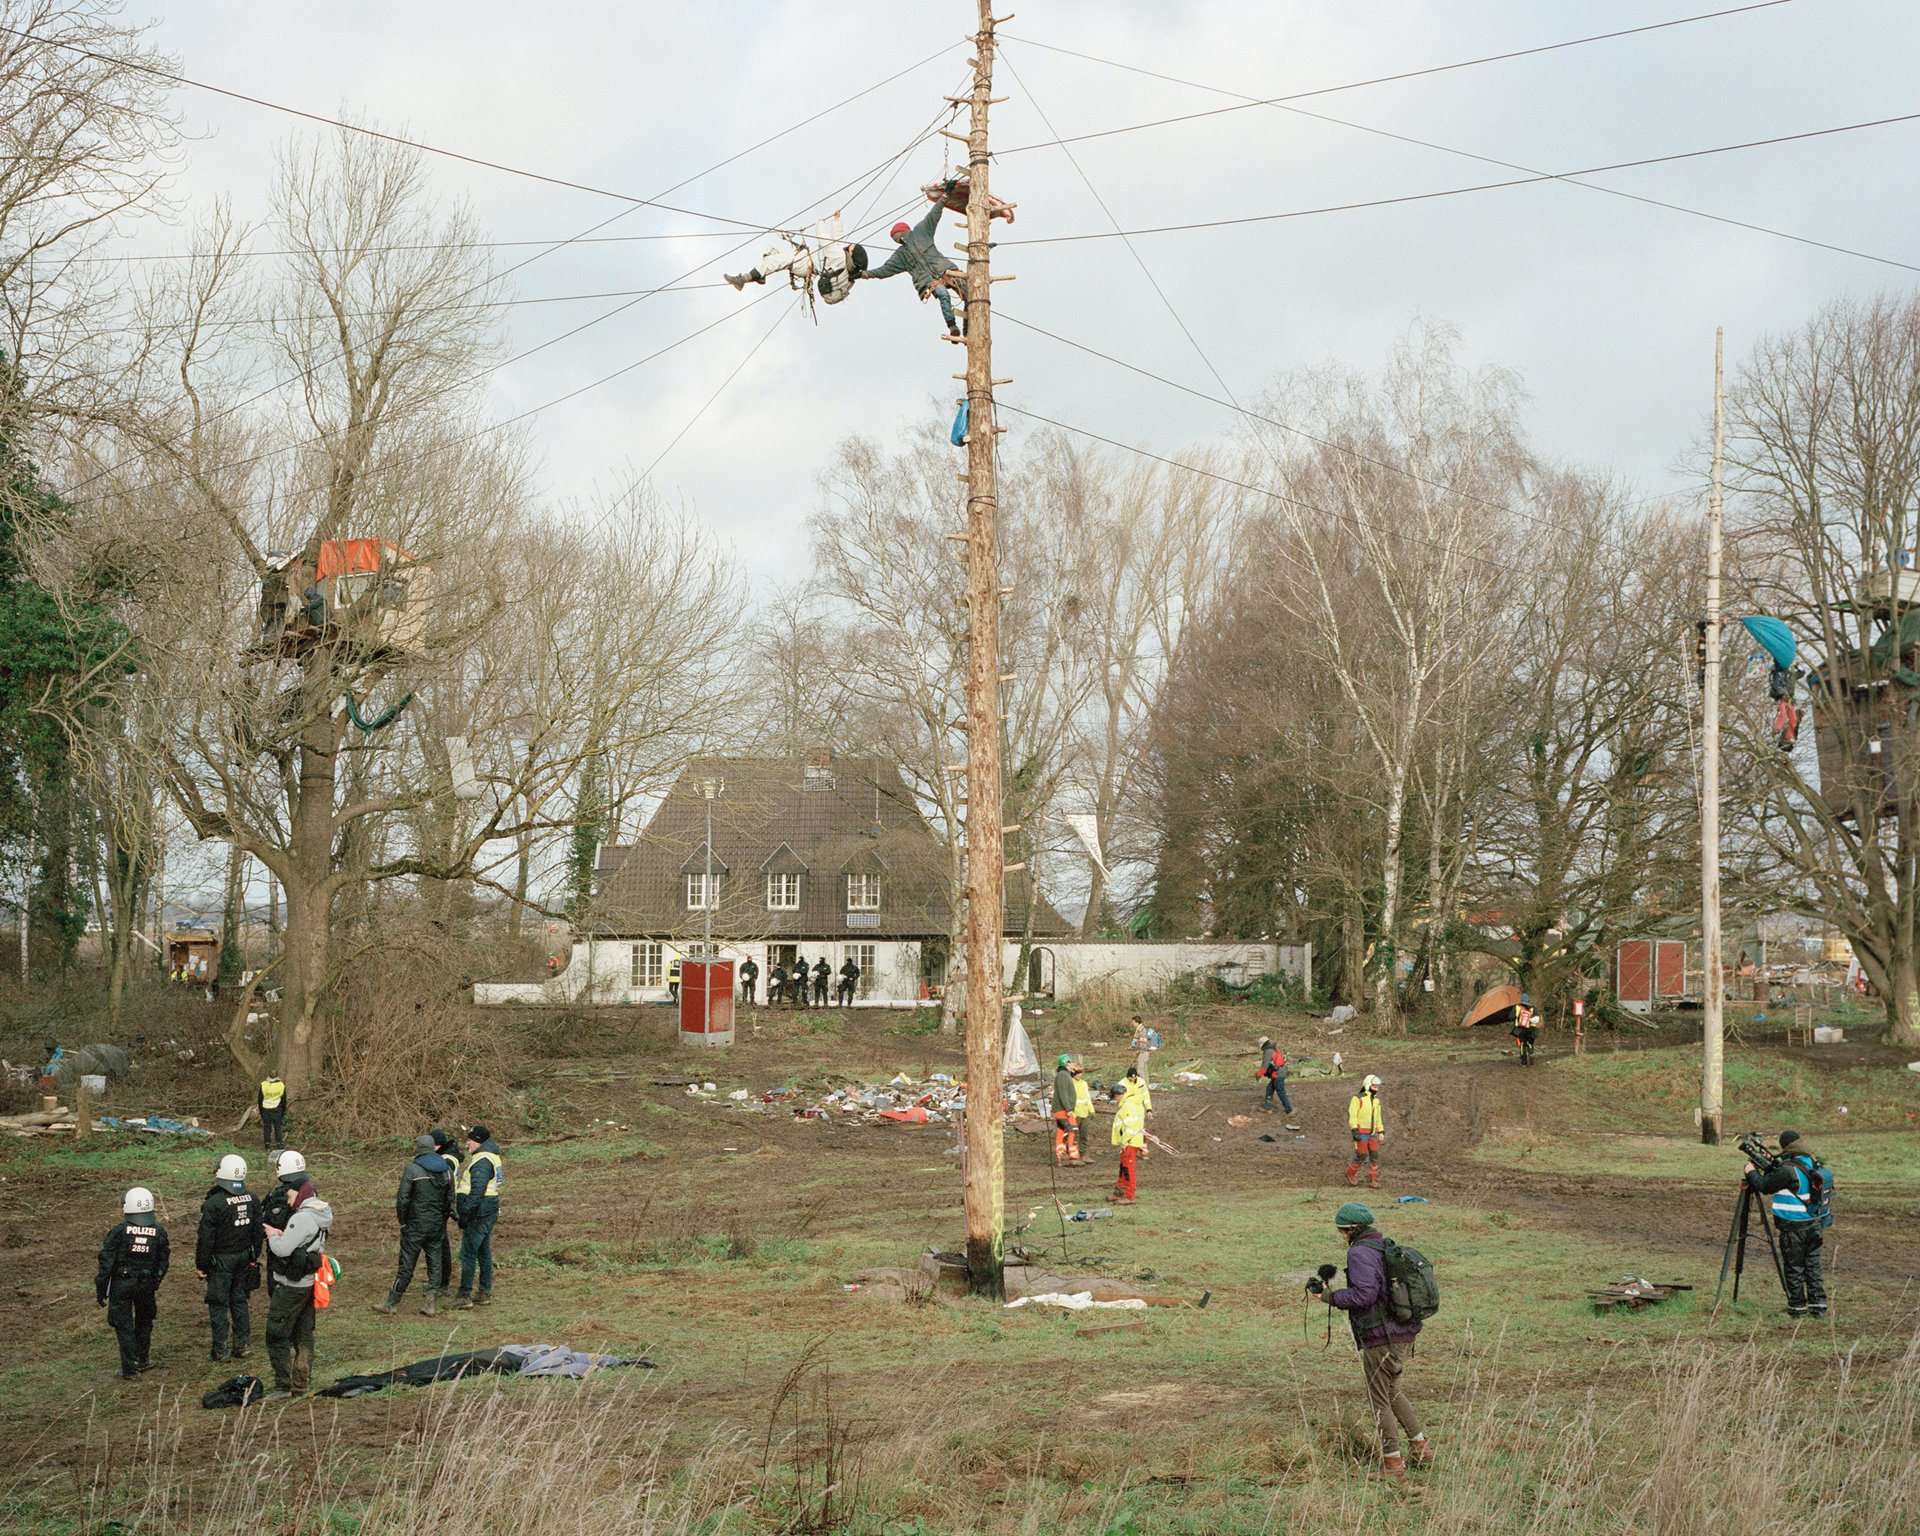 An activist on an access tower aids another, who is climbing along ropes from a treehouse, in Lützerath, Germany. These ropes sometimes allow activists to evade the police, who approach them on cherry pickers.